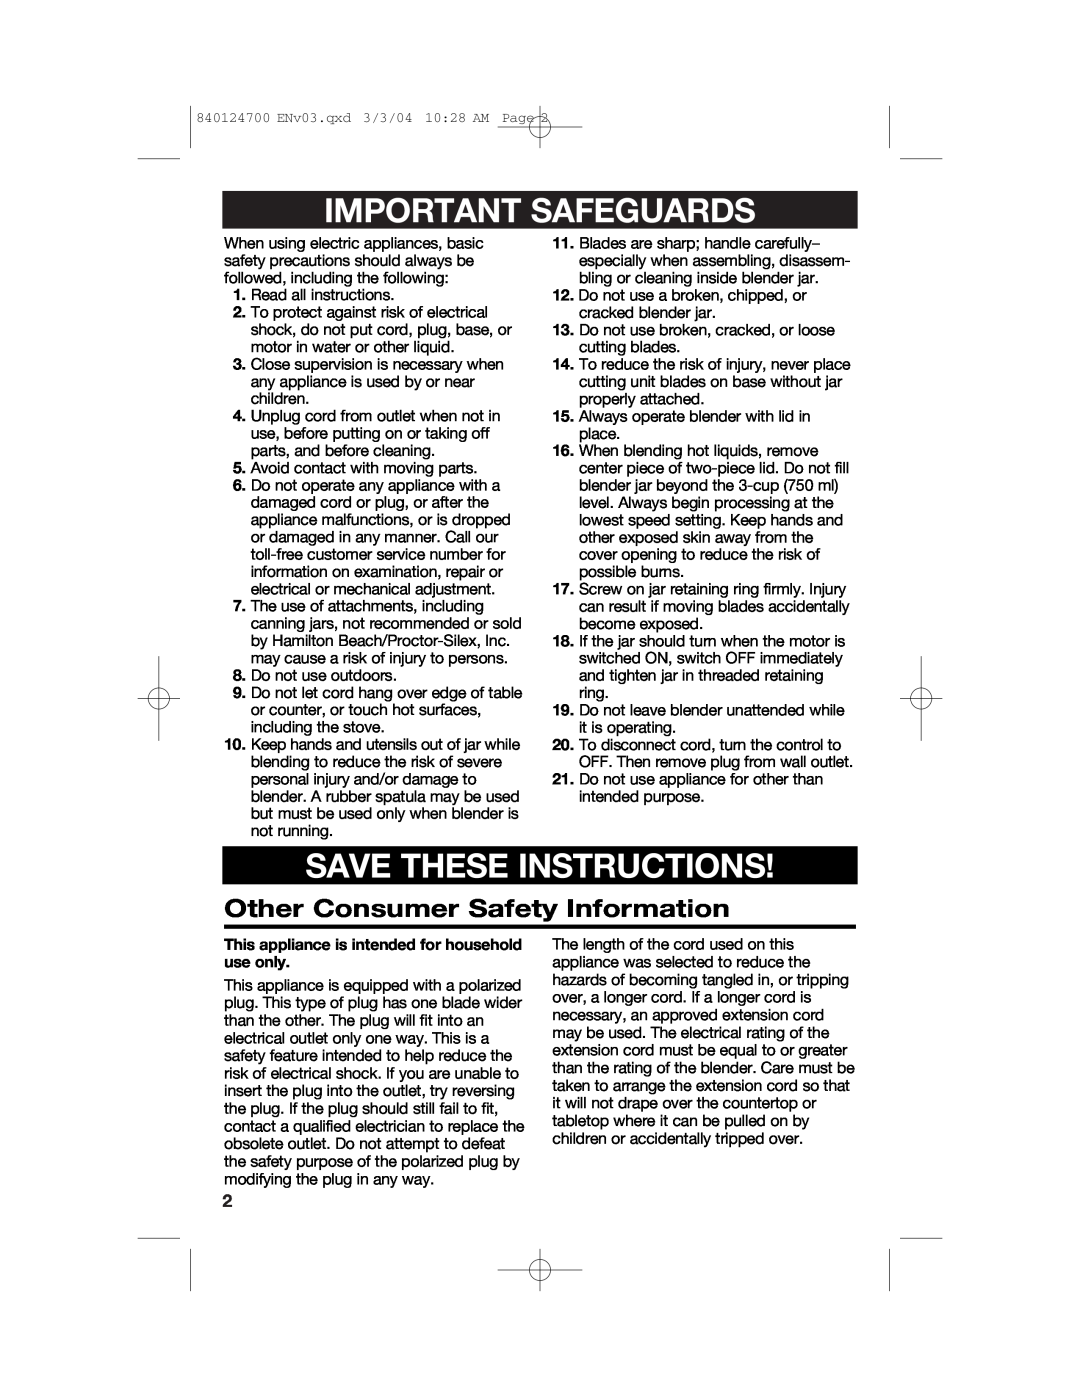 Hamilton Beach 2254 manual Important Safeguards, Save These Instructions, Other Consumer Safety Information 